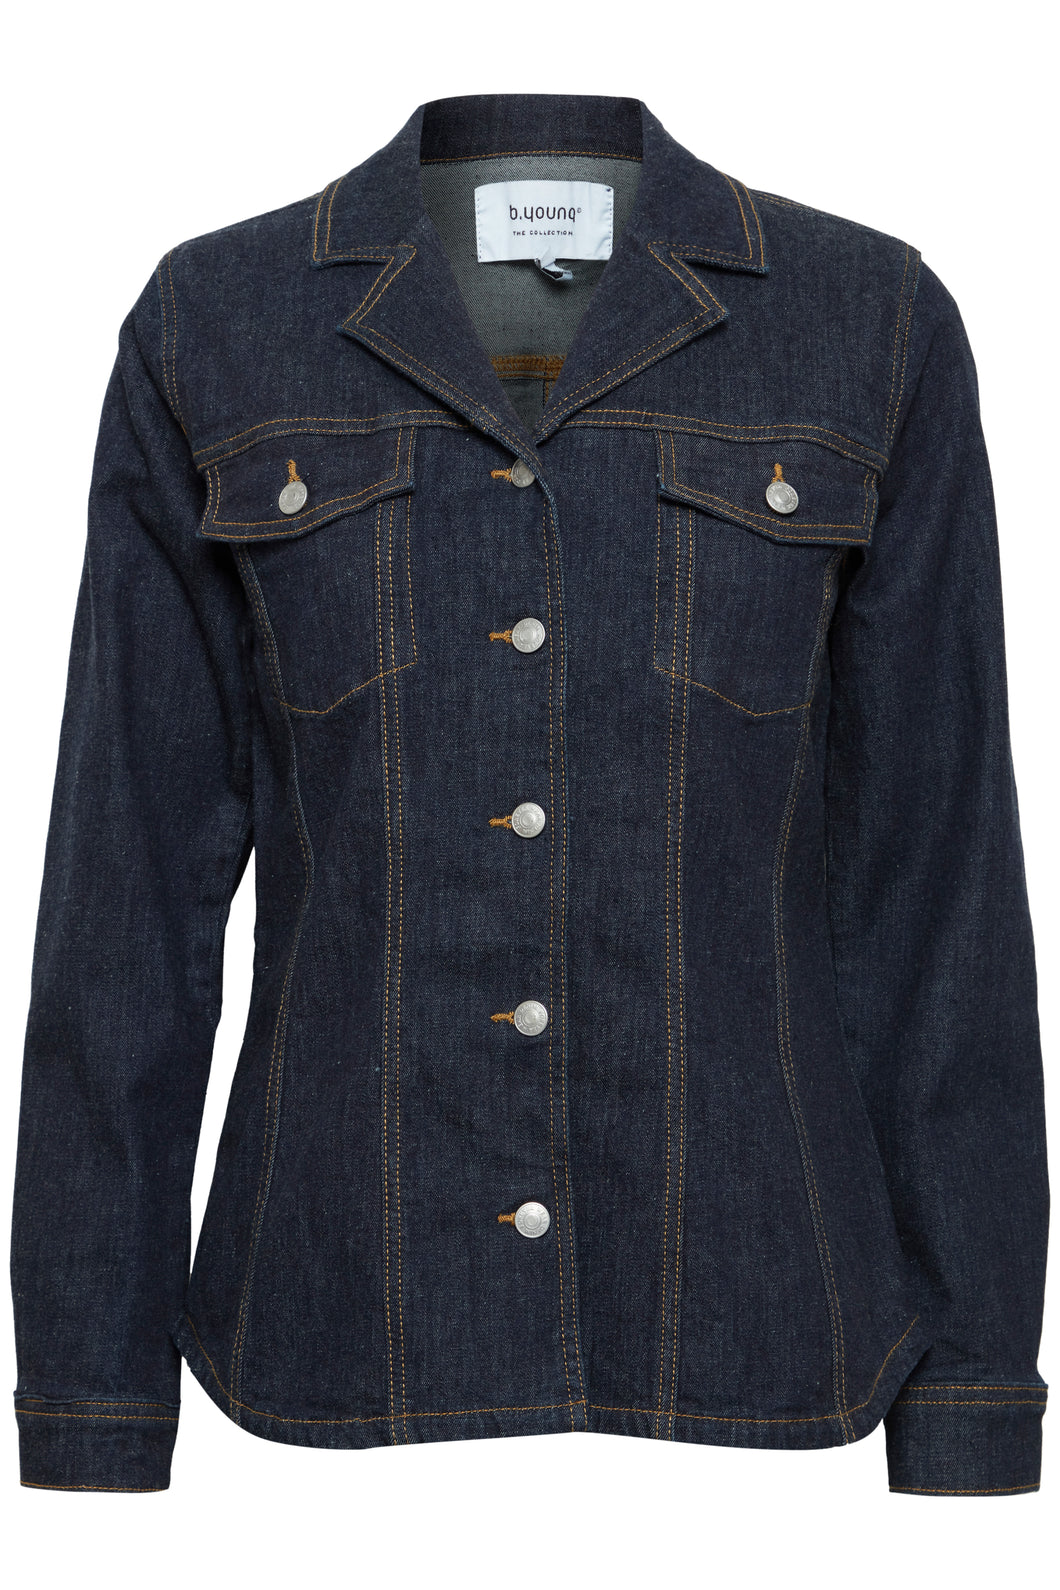 B. YOUNG Giacca Camicia in denim donna